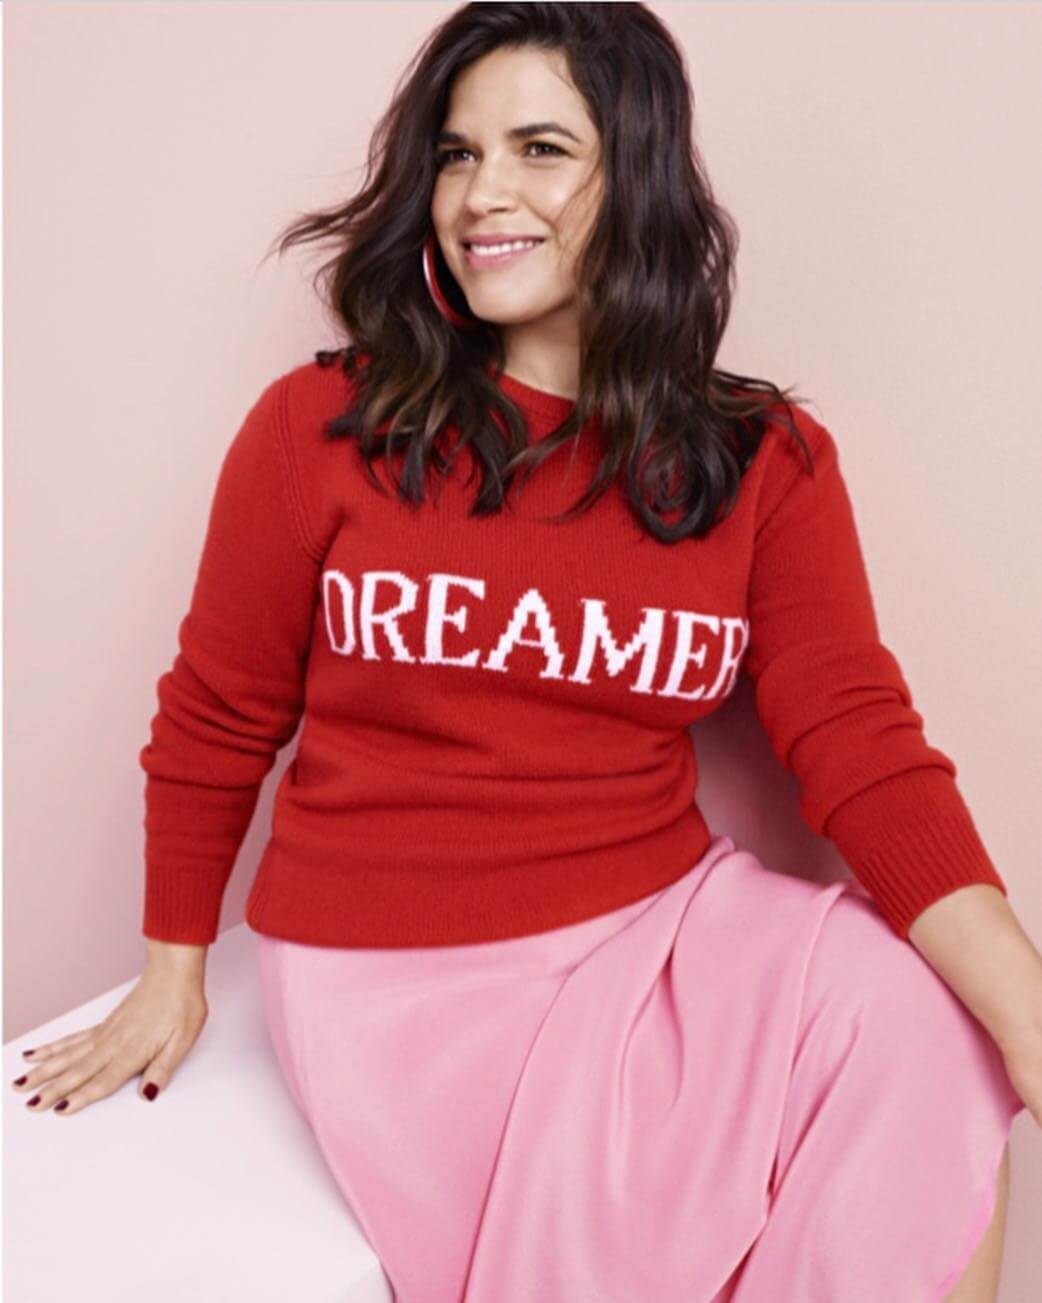 60+ Hot Pictures Of America Ferrera Which Are Here To Make Your Day A Win | Best Of Comic Books